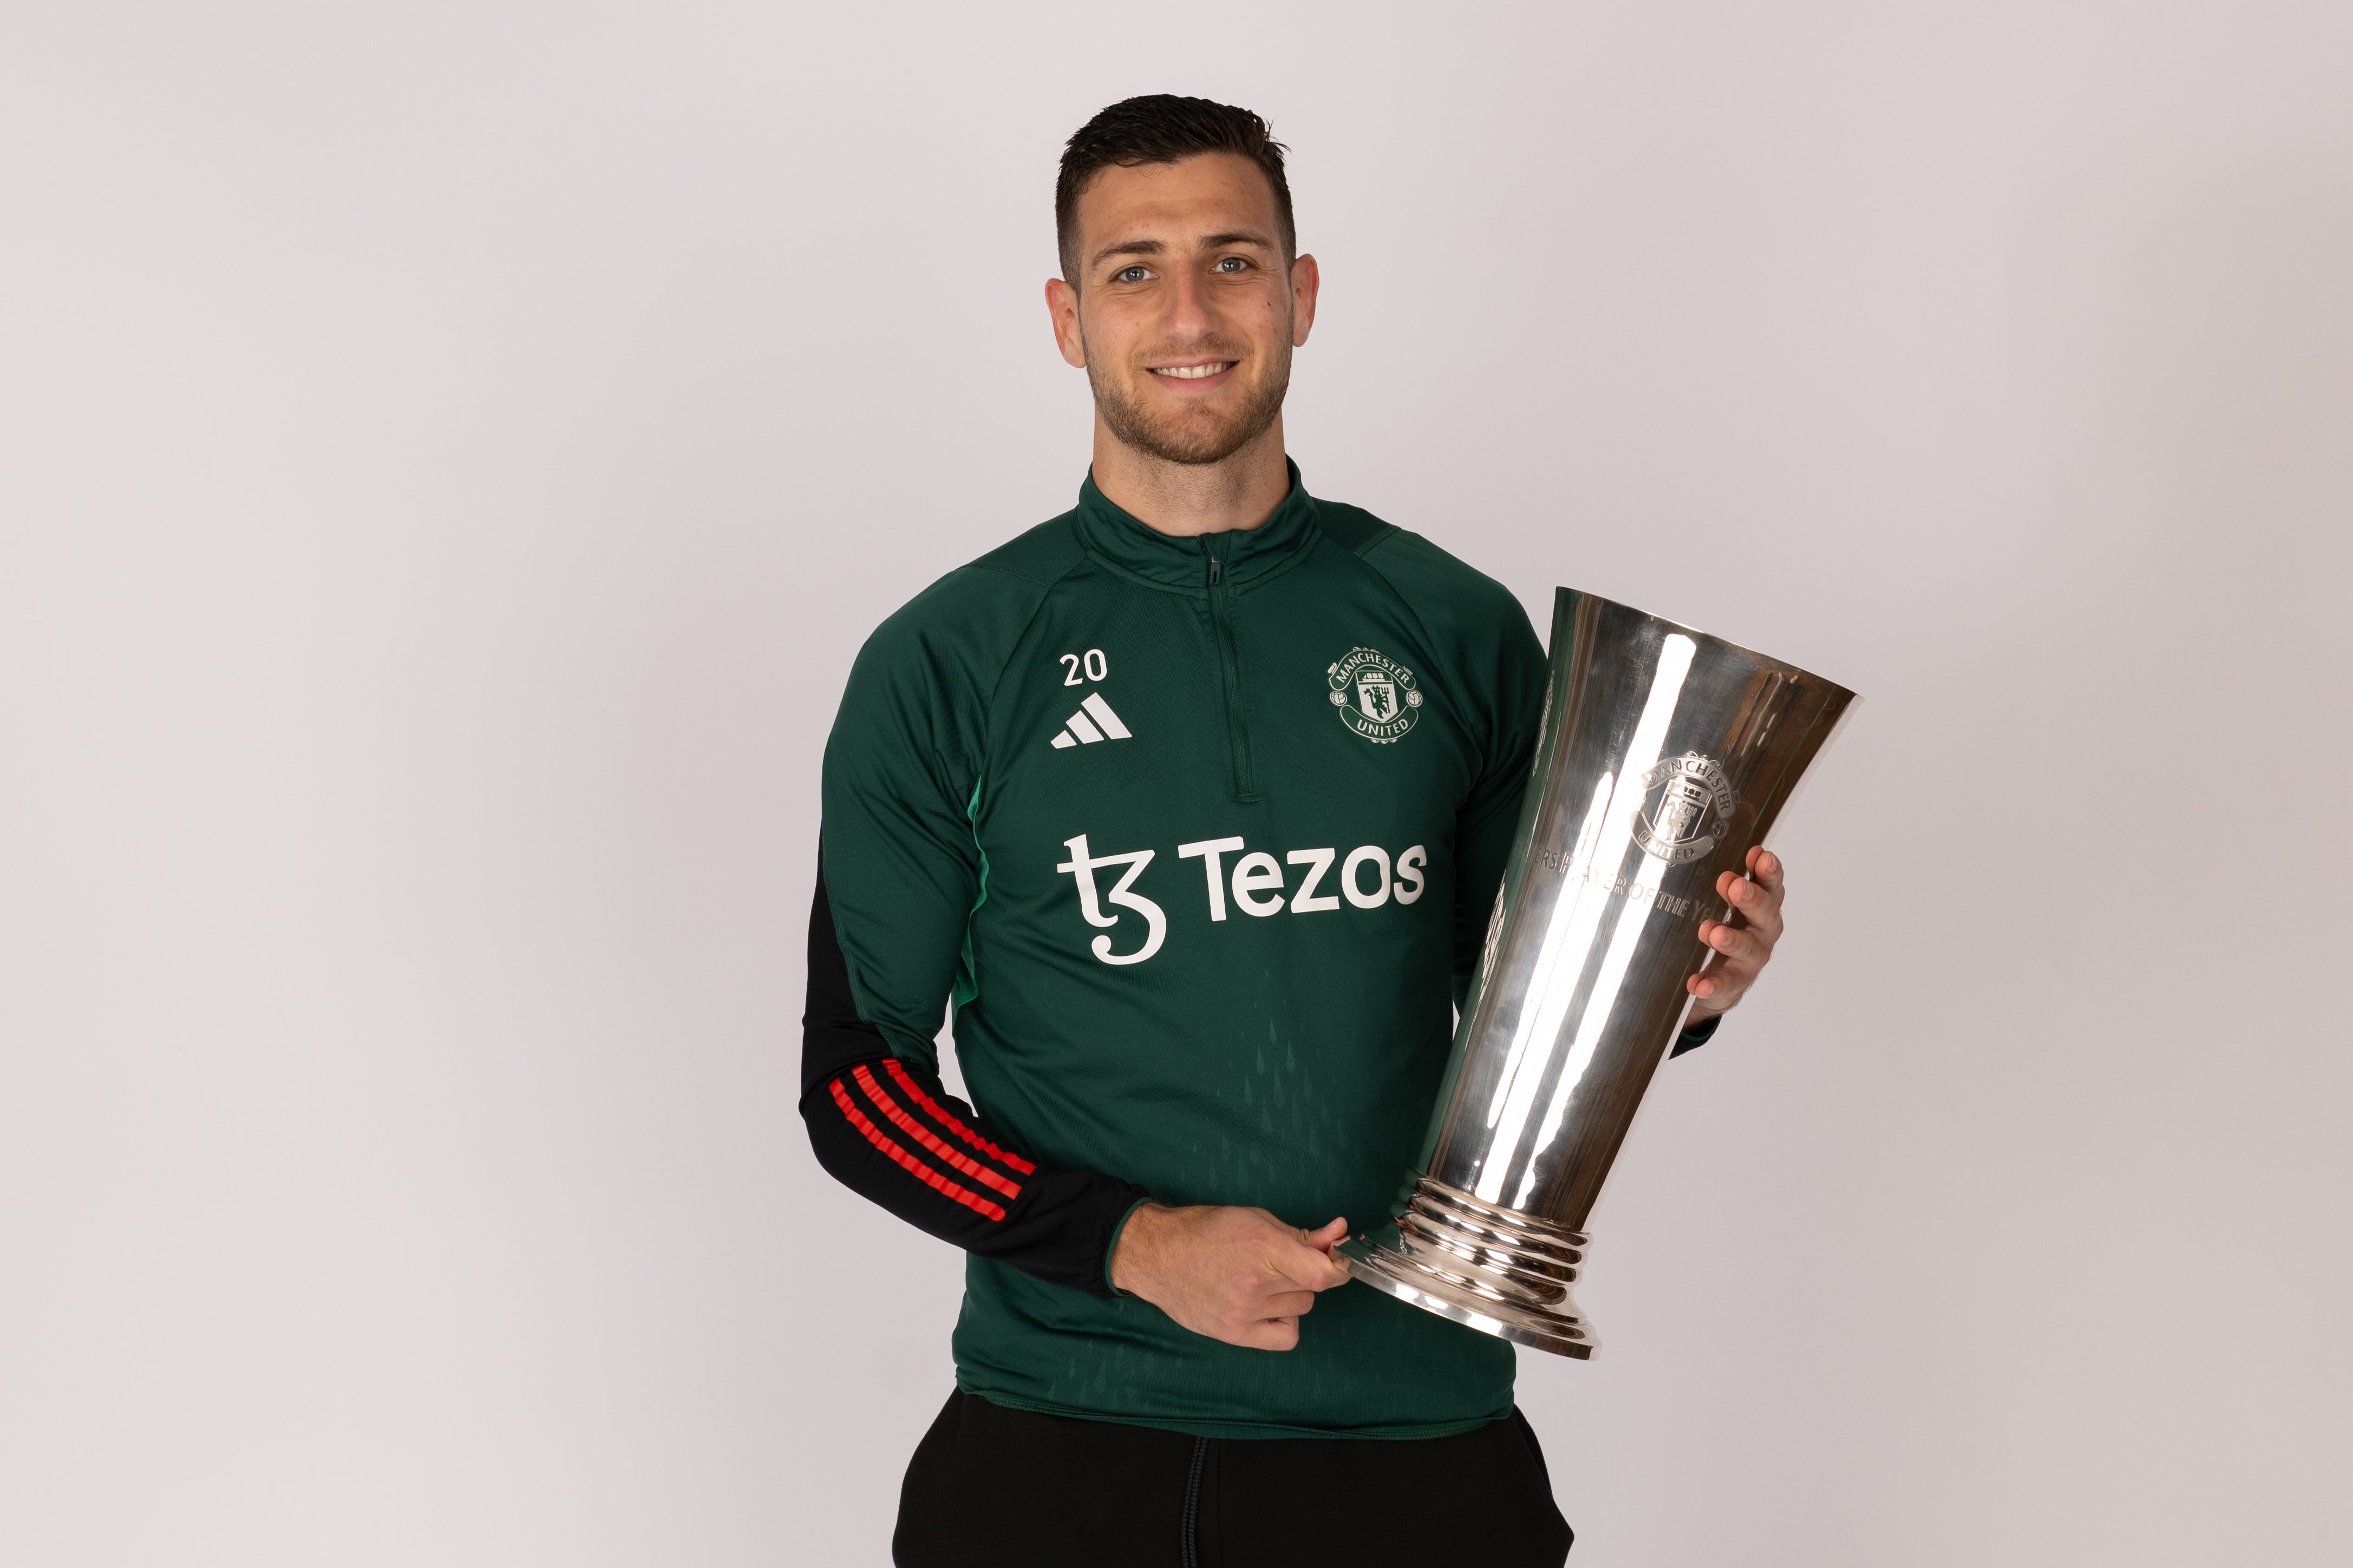 Dalot won his club’s players’ player of the year award